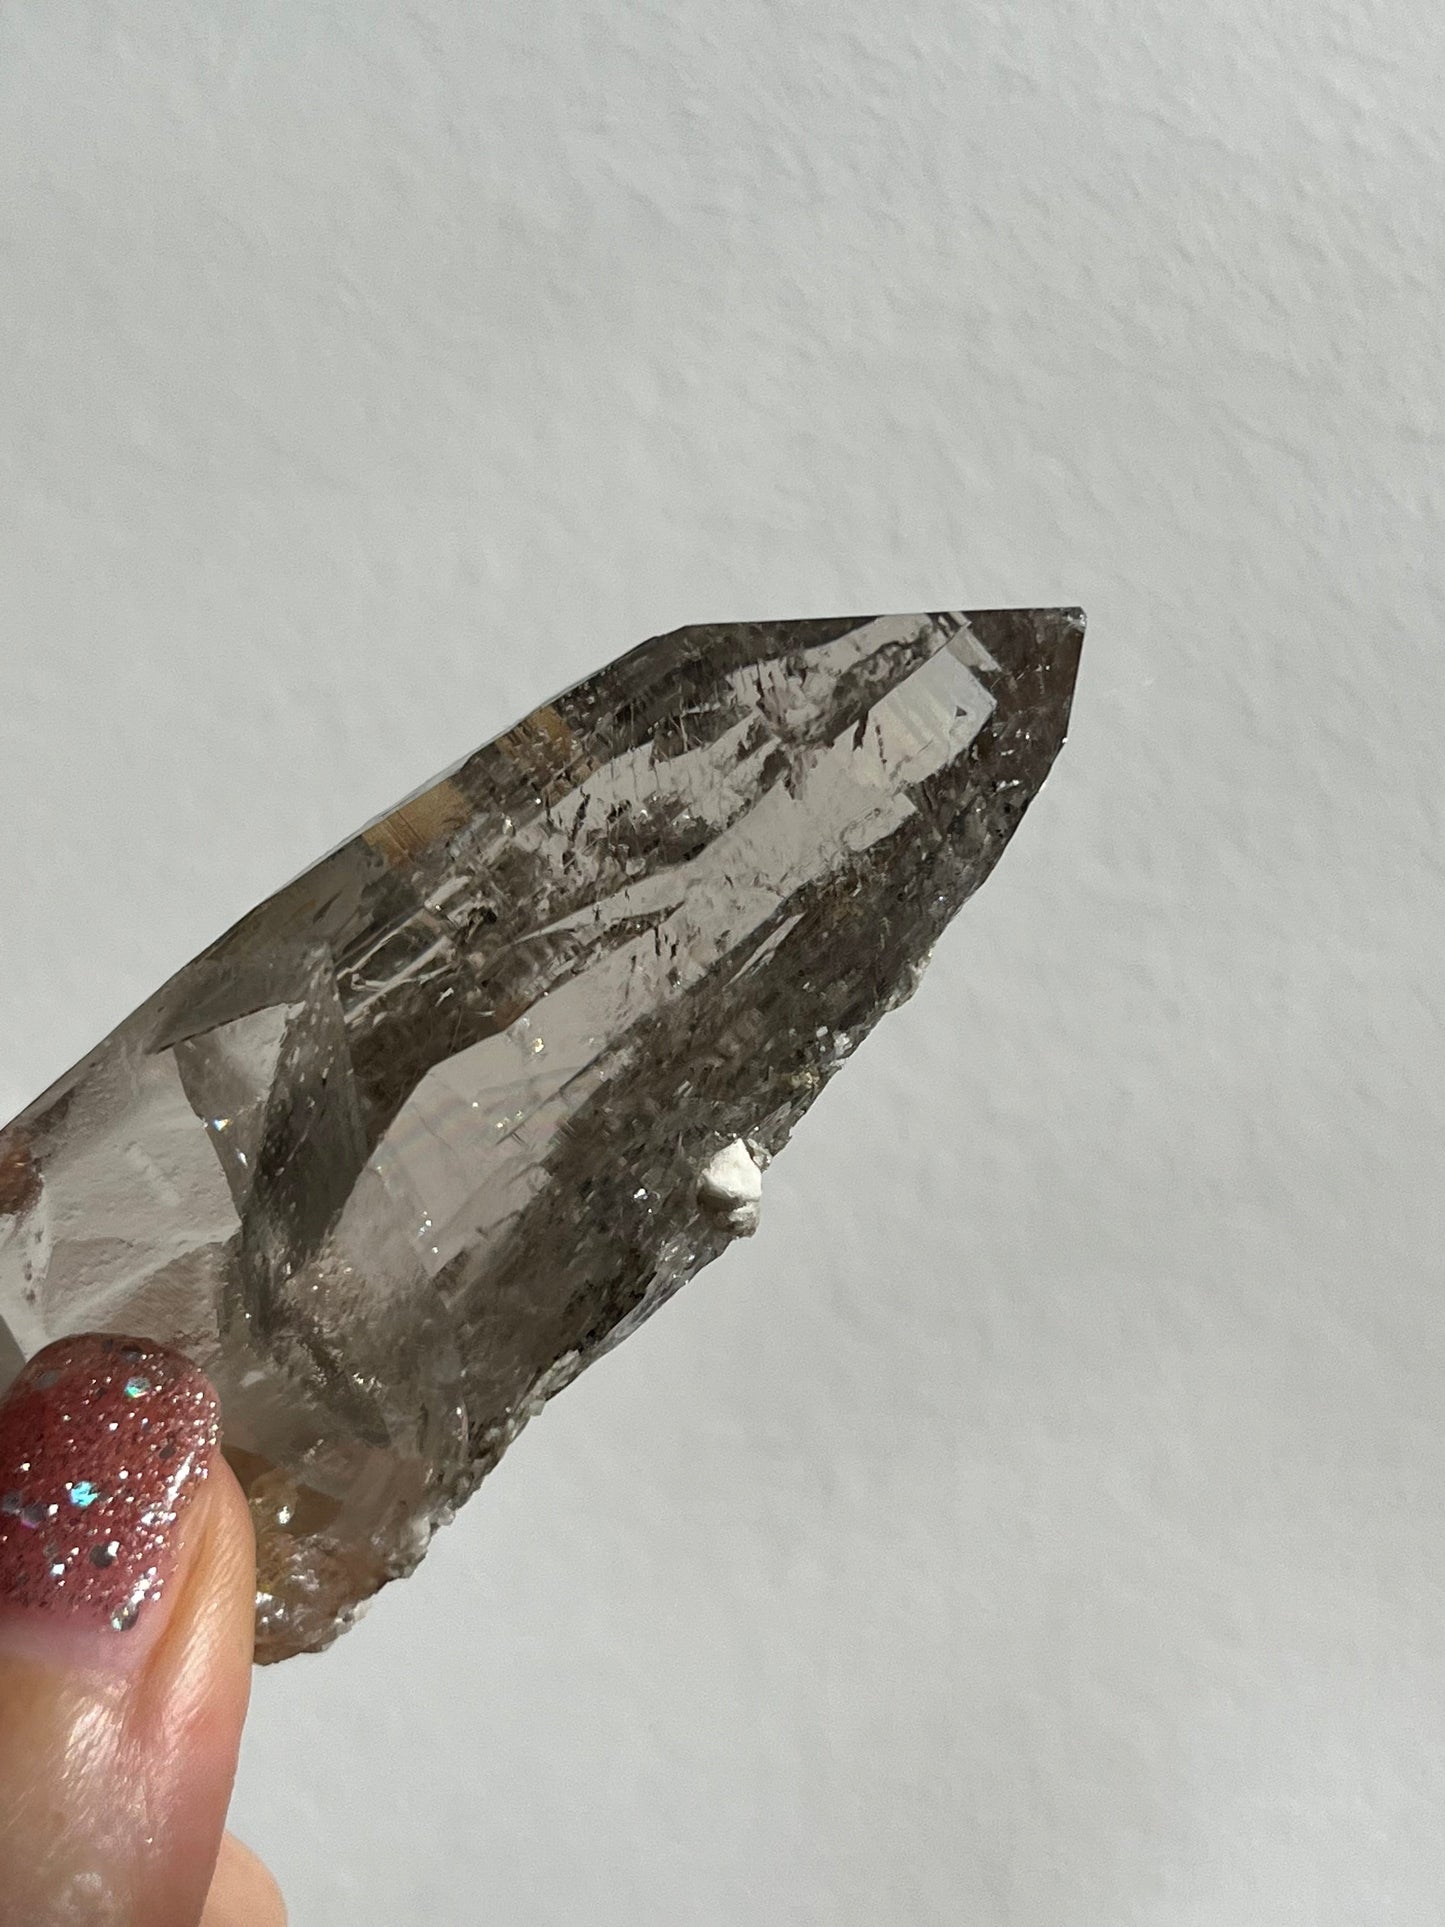 Water Clear Elestial Himalayan Smokey Quartz Cluster w/Siderite, Albite & Spessartine Garnet Inclusion #13 (Perfectly Imperfect)